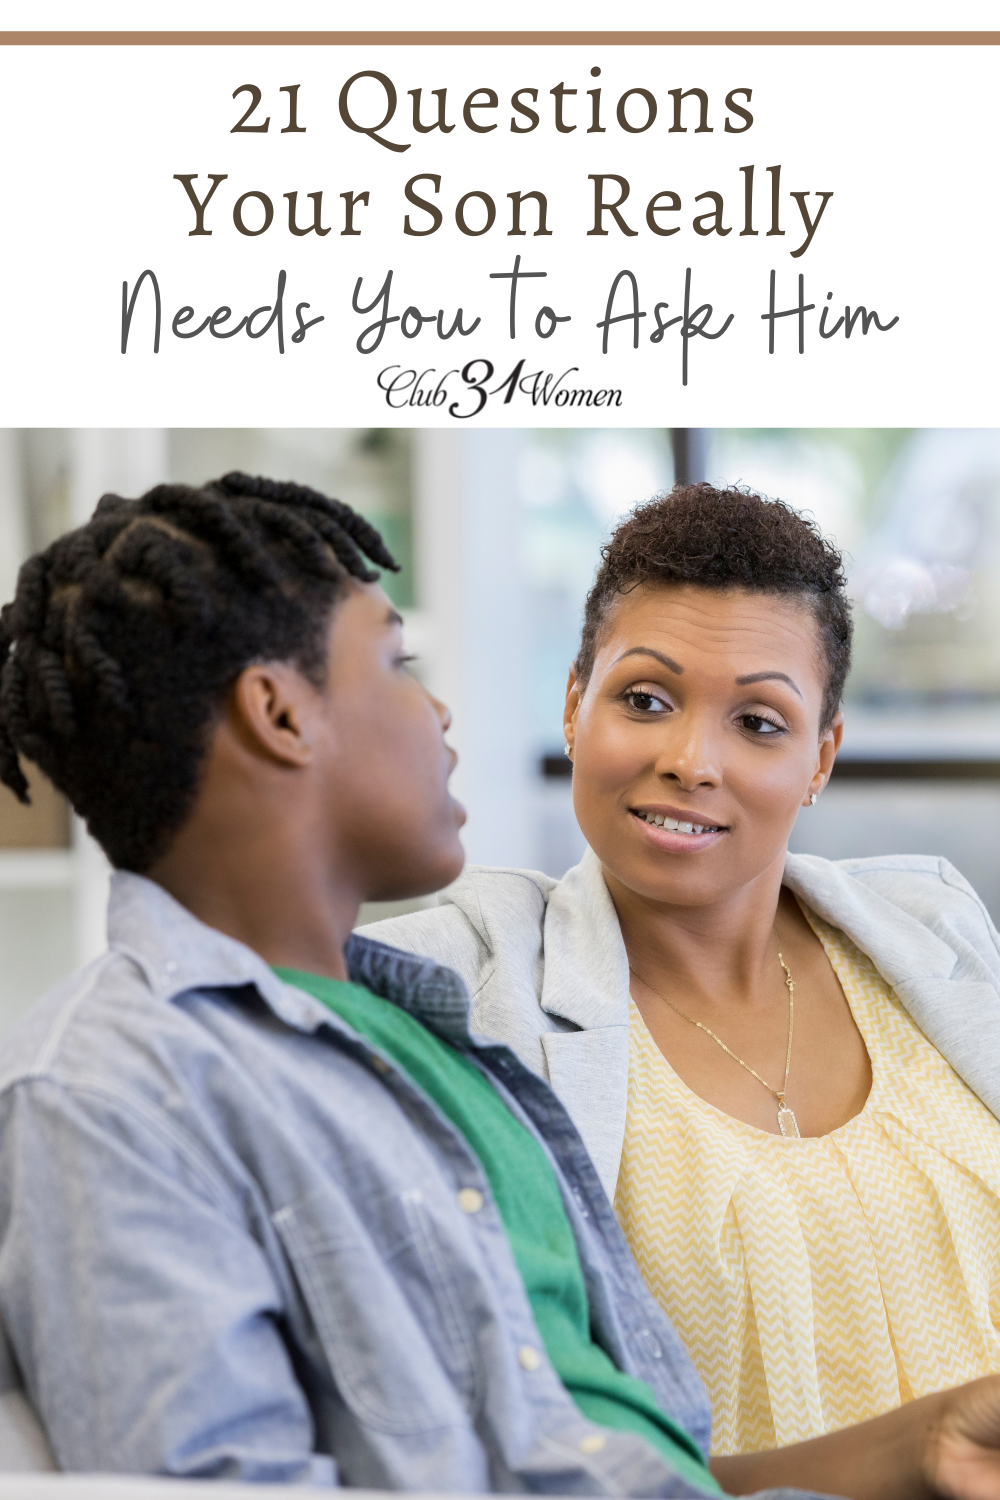 How do you grow closer with your son? How to build a better understanding? Here are 21 questions he really needs you to ask to start the conversation. via @Club31Women